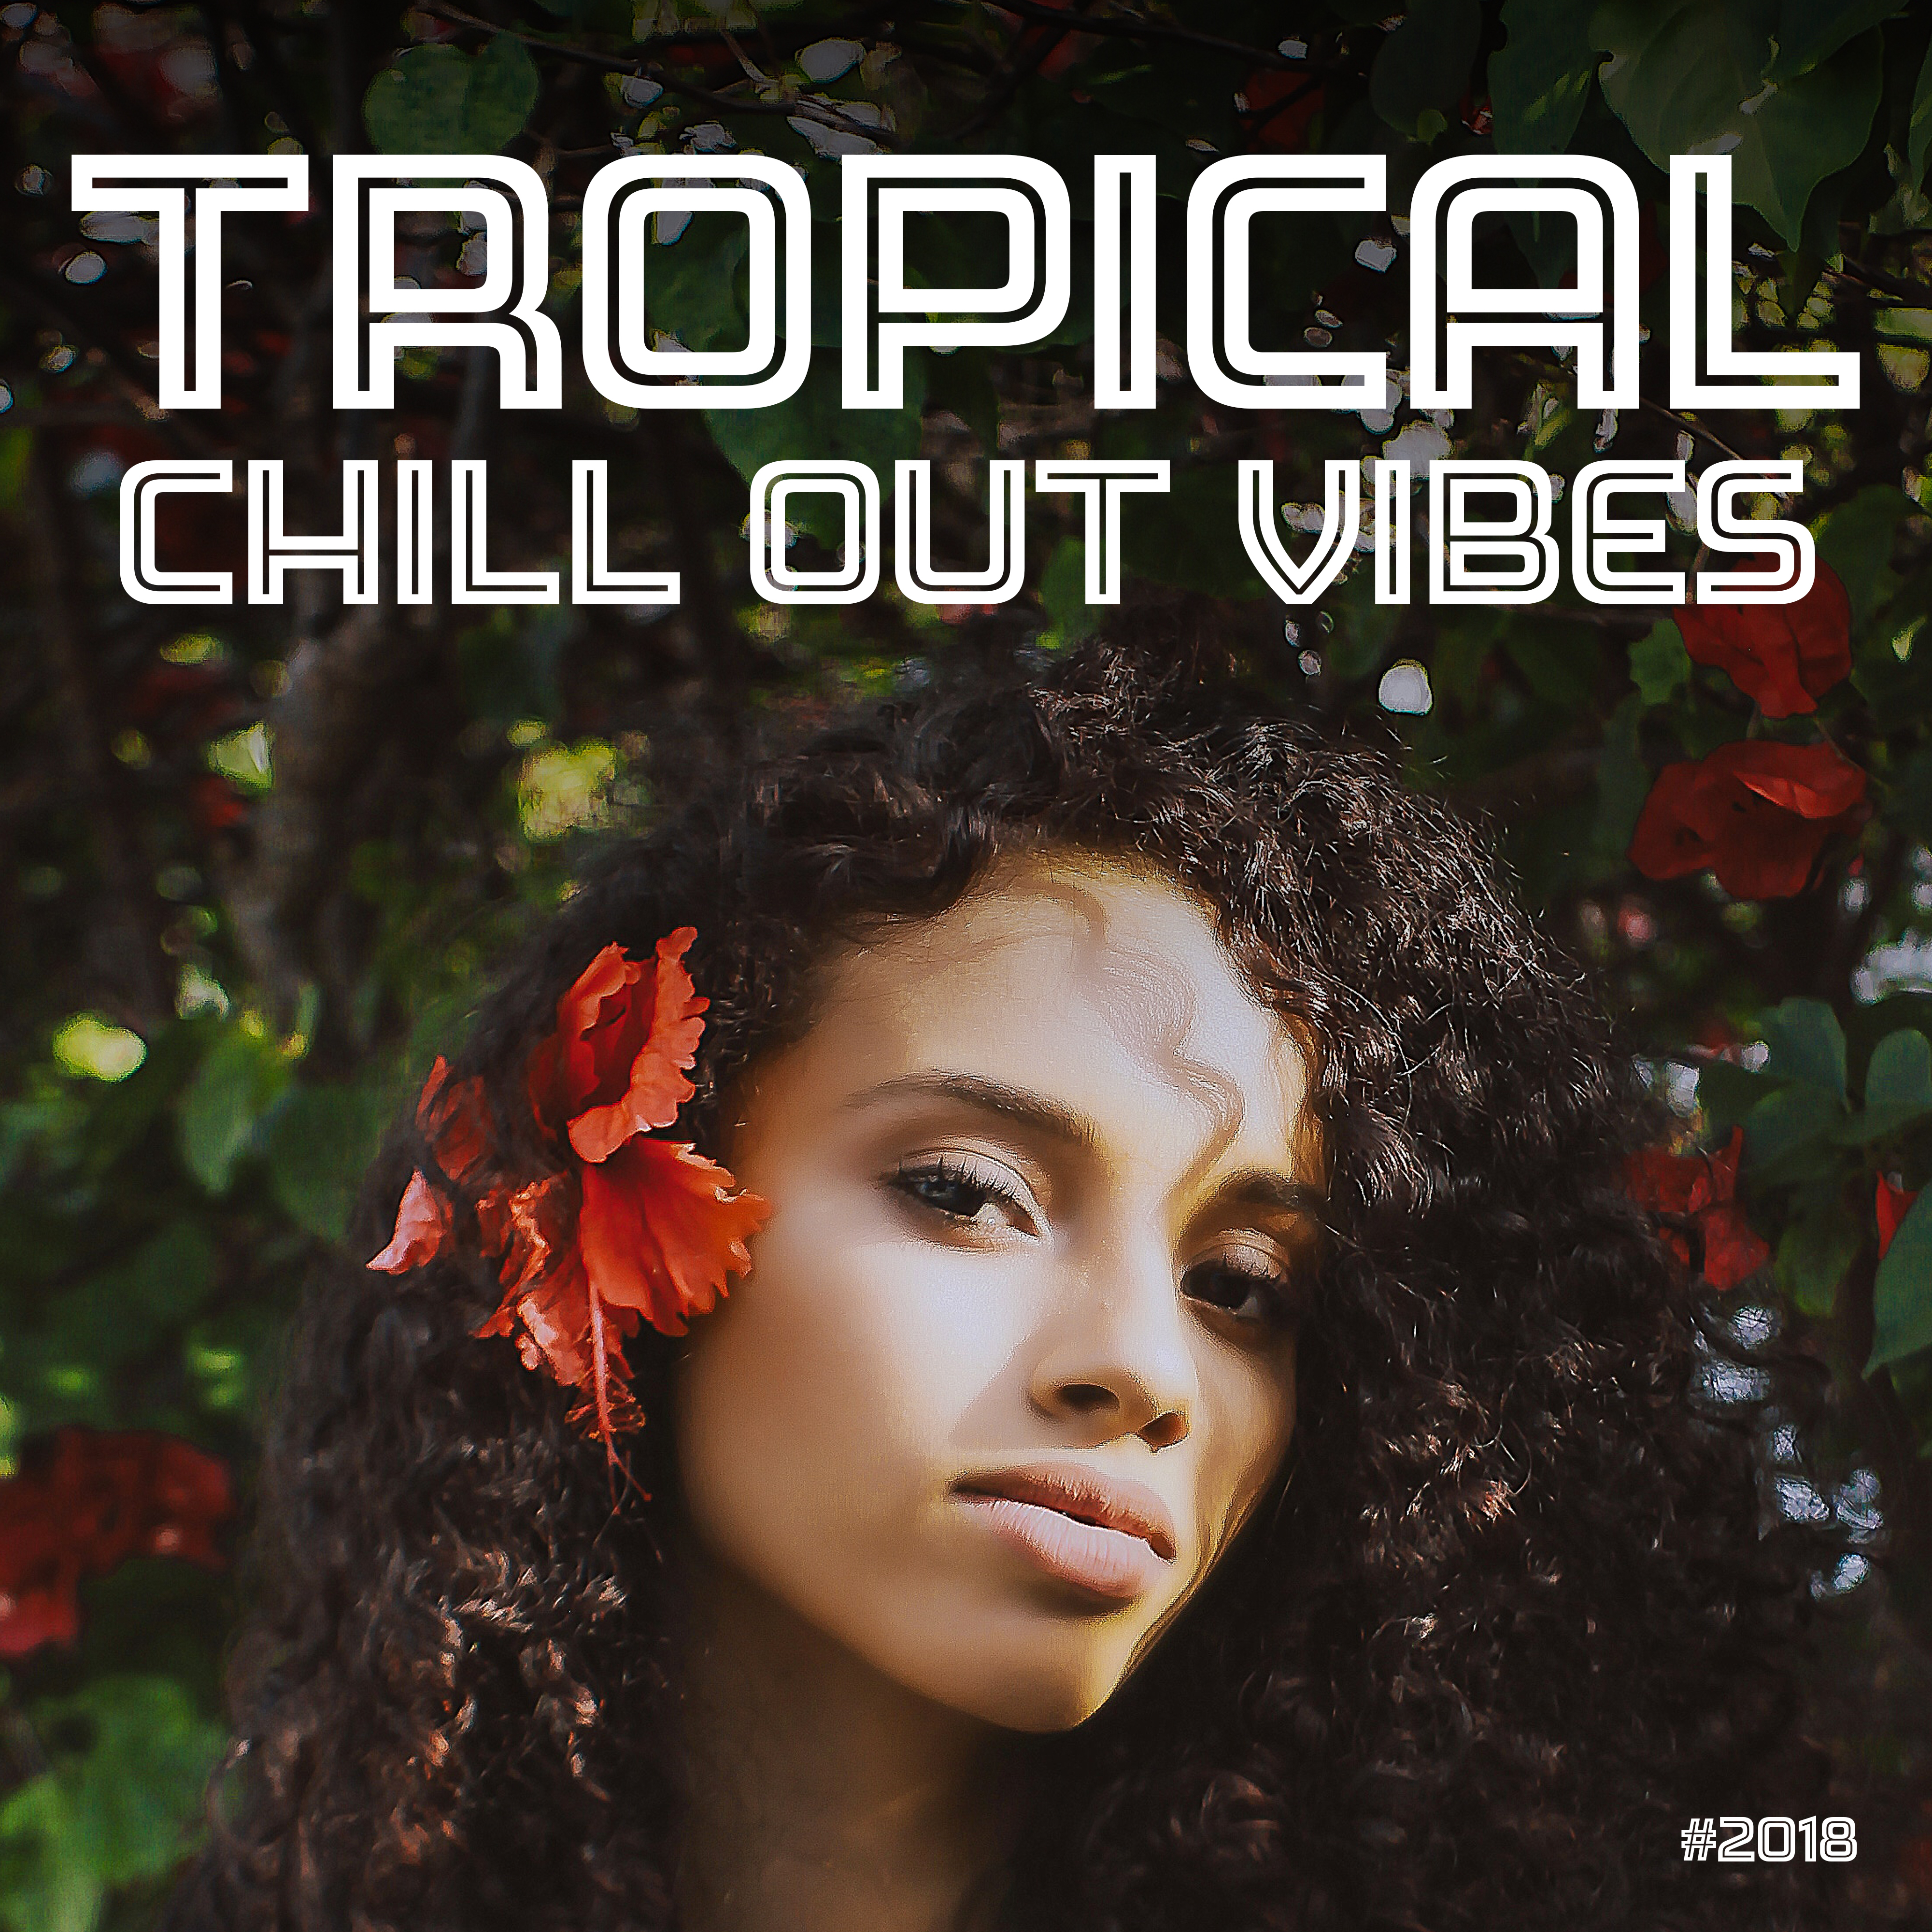 #2018 Tropical Chill Out Vibes